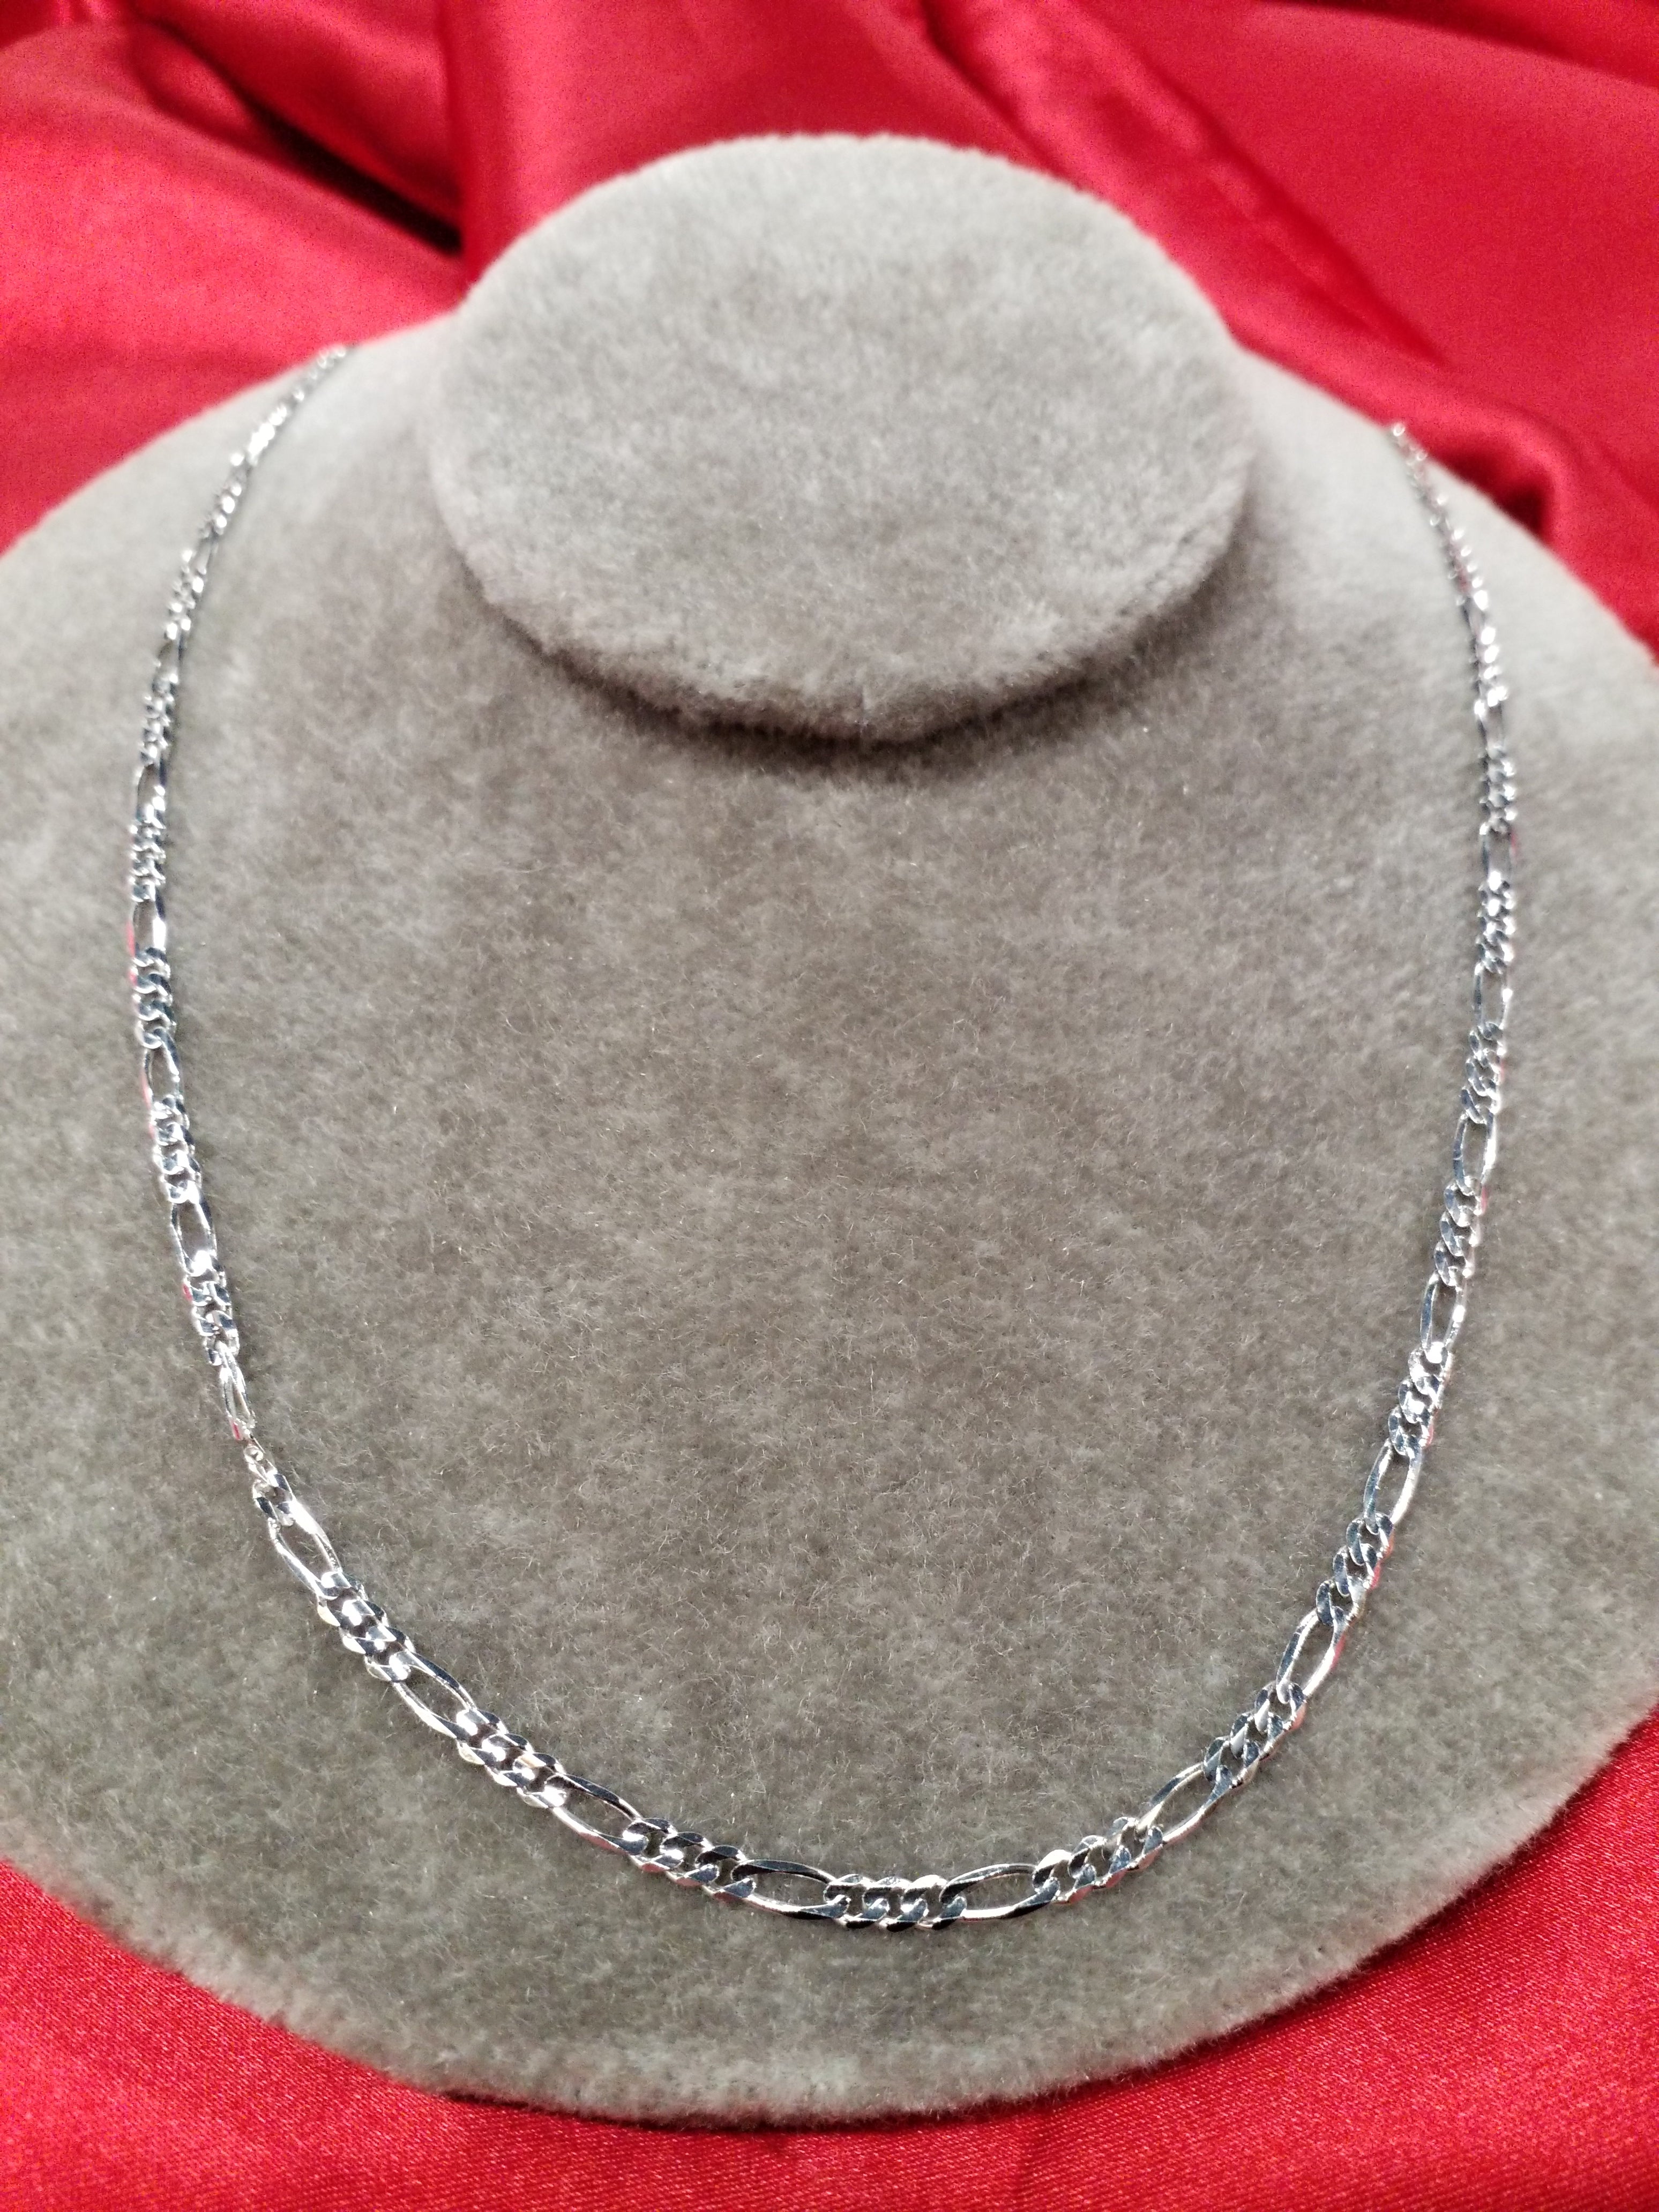 24" 10Kt White Gold Figaro Style Chain